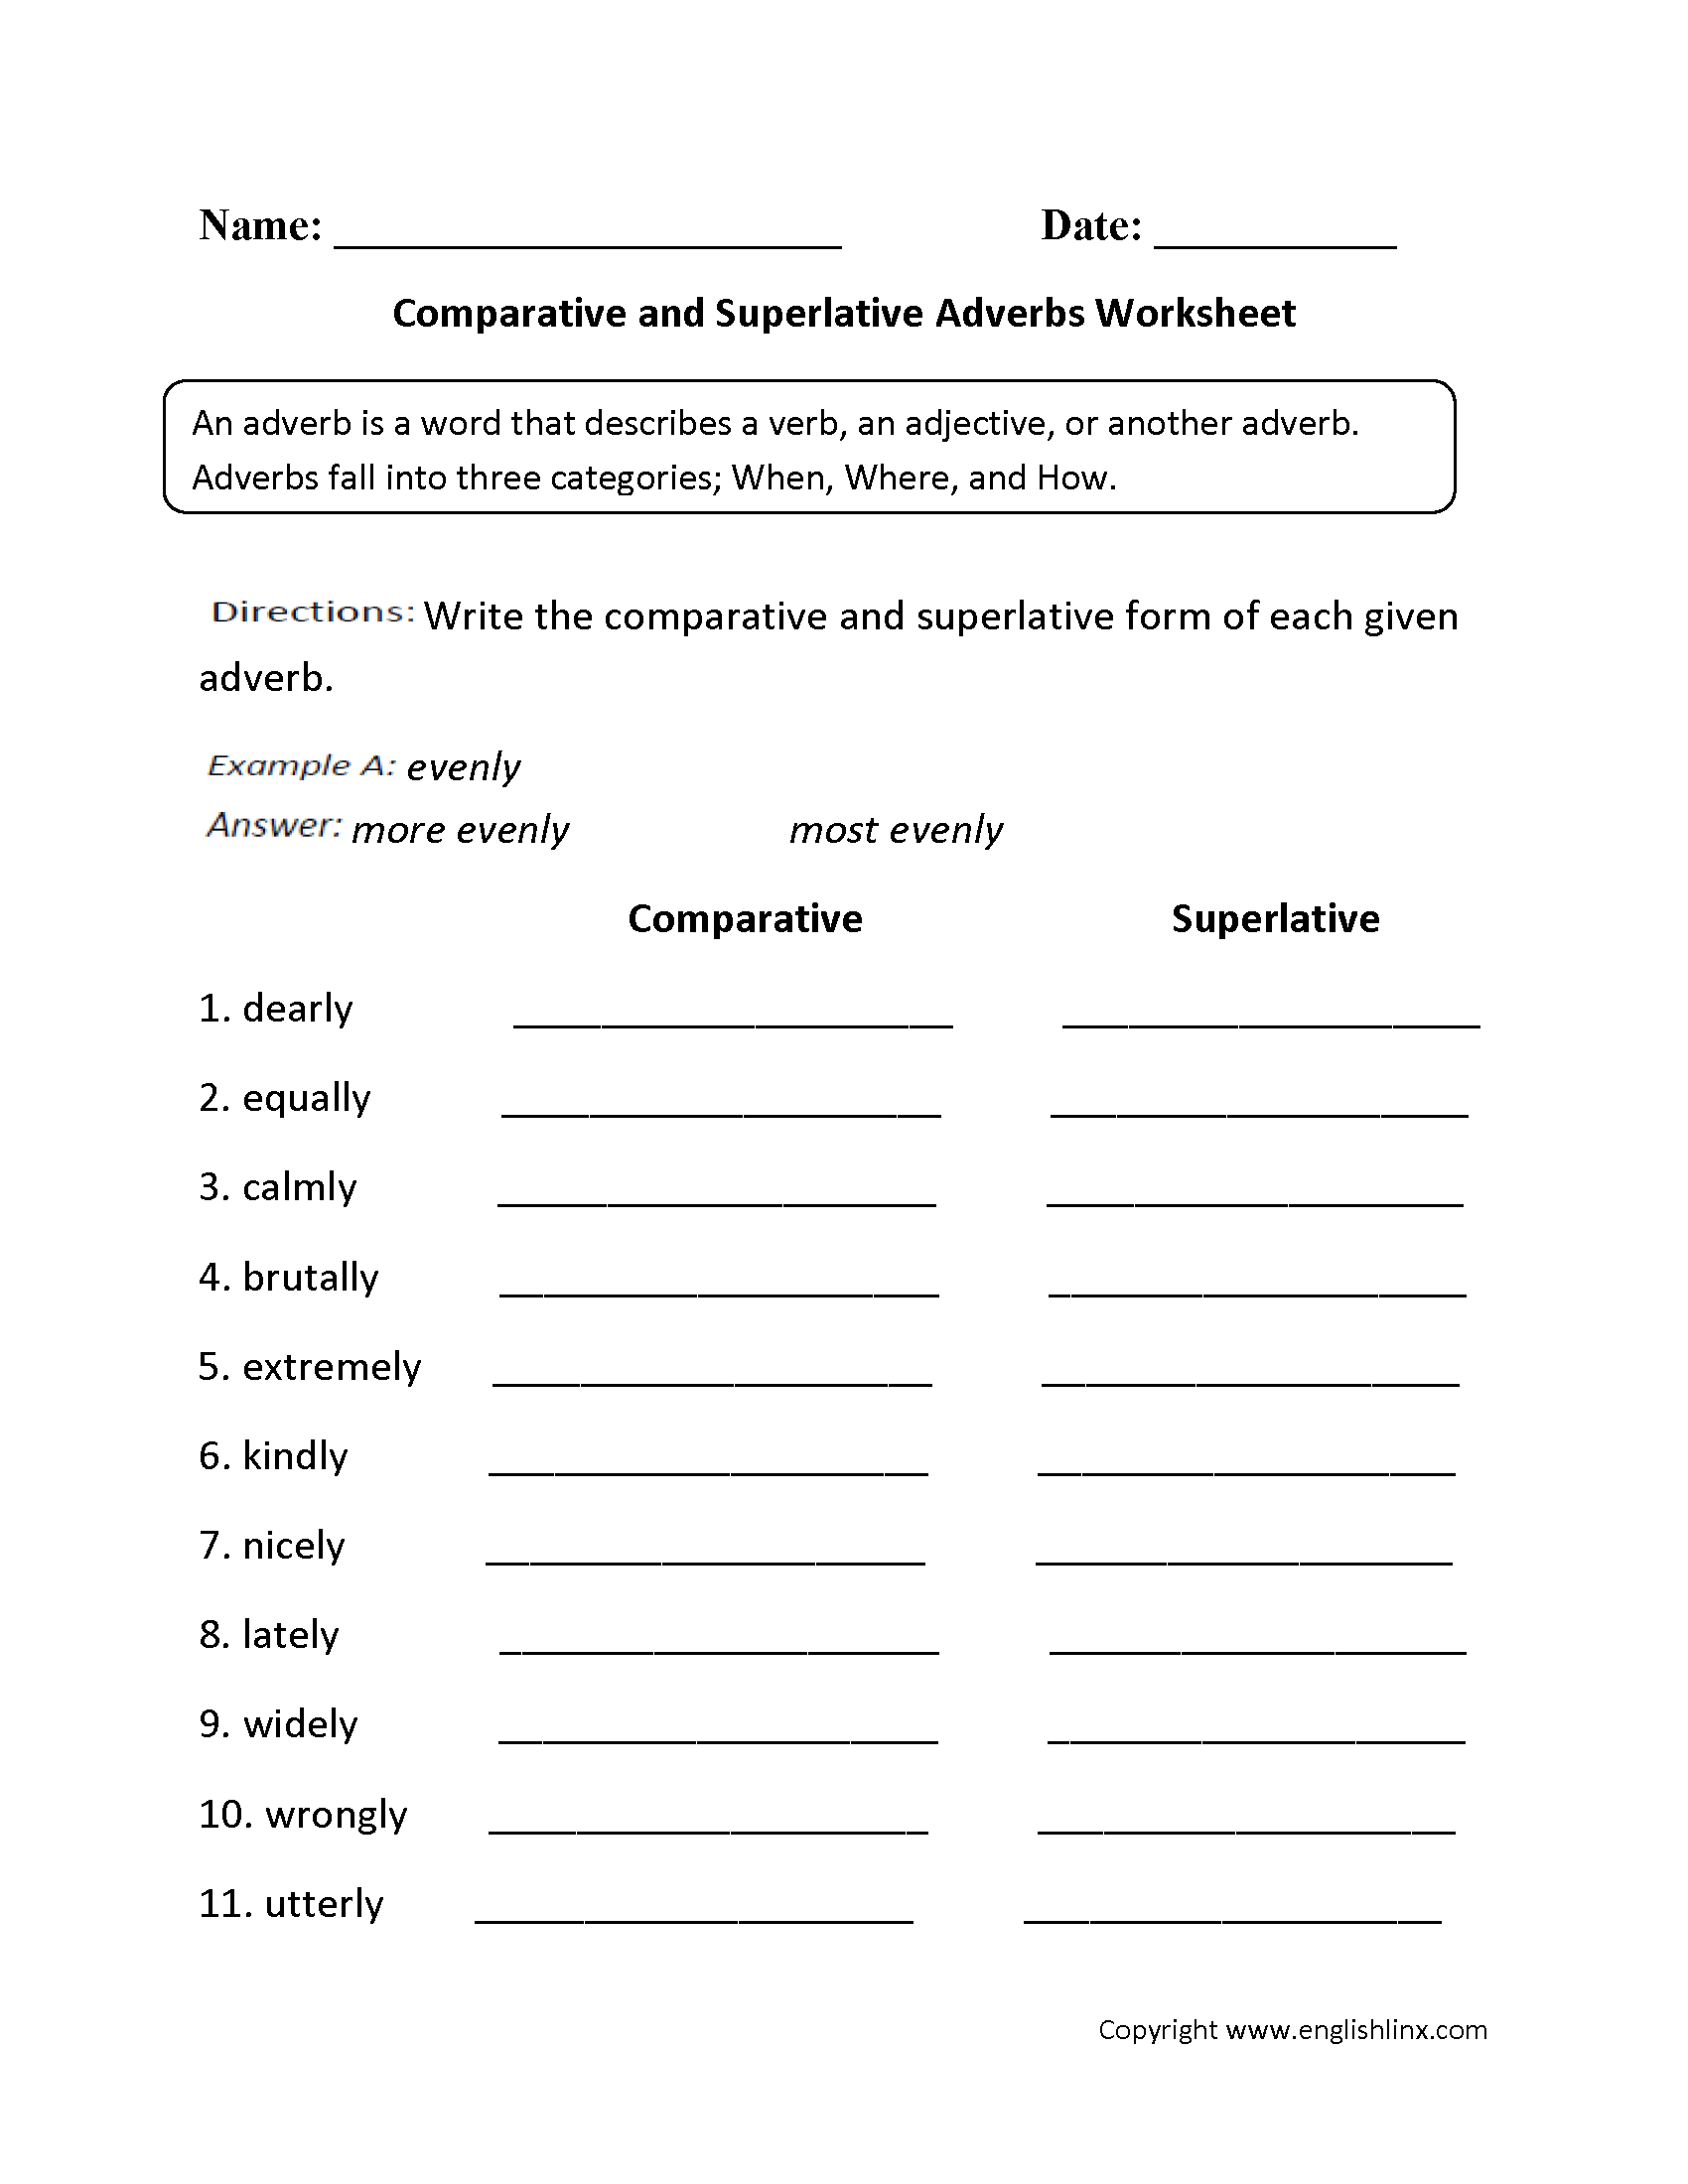 13-best-images-of-comparatives-and-superlative-worksheets-easy-comparative-and-superlative